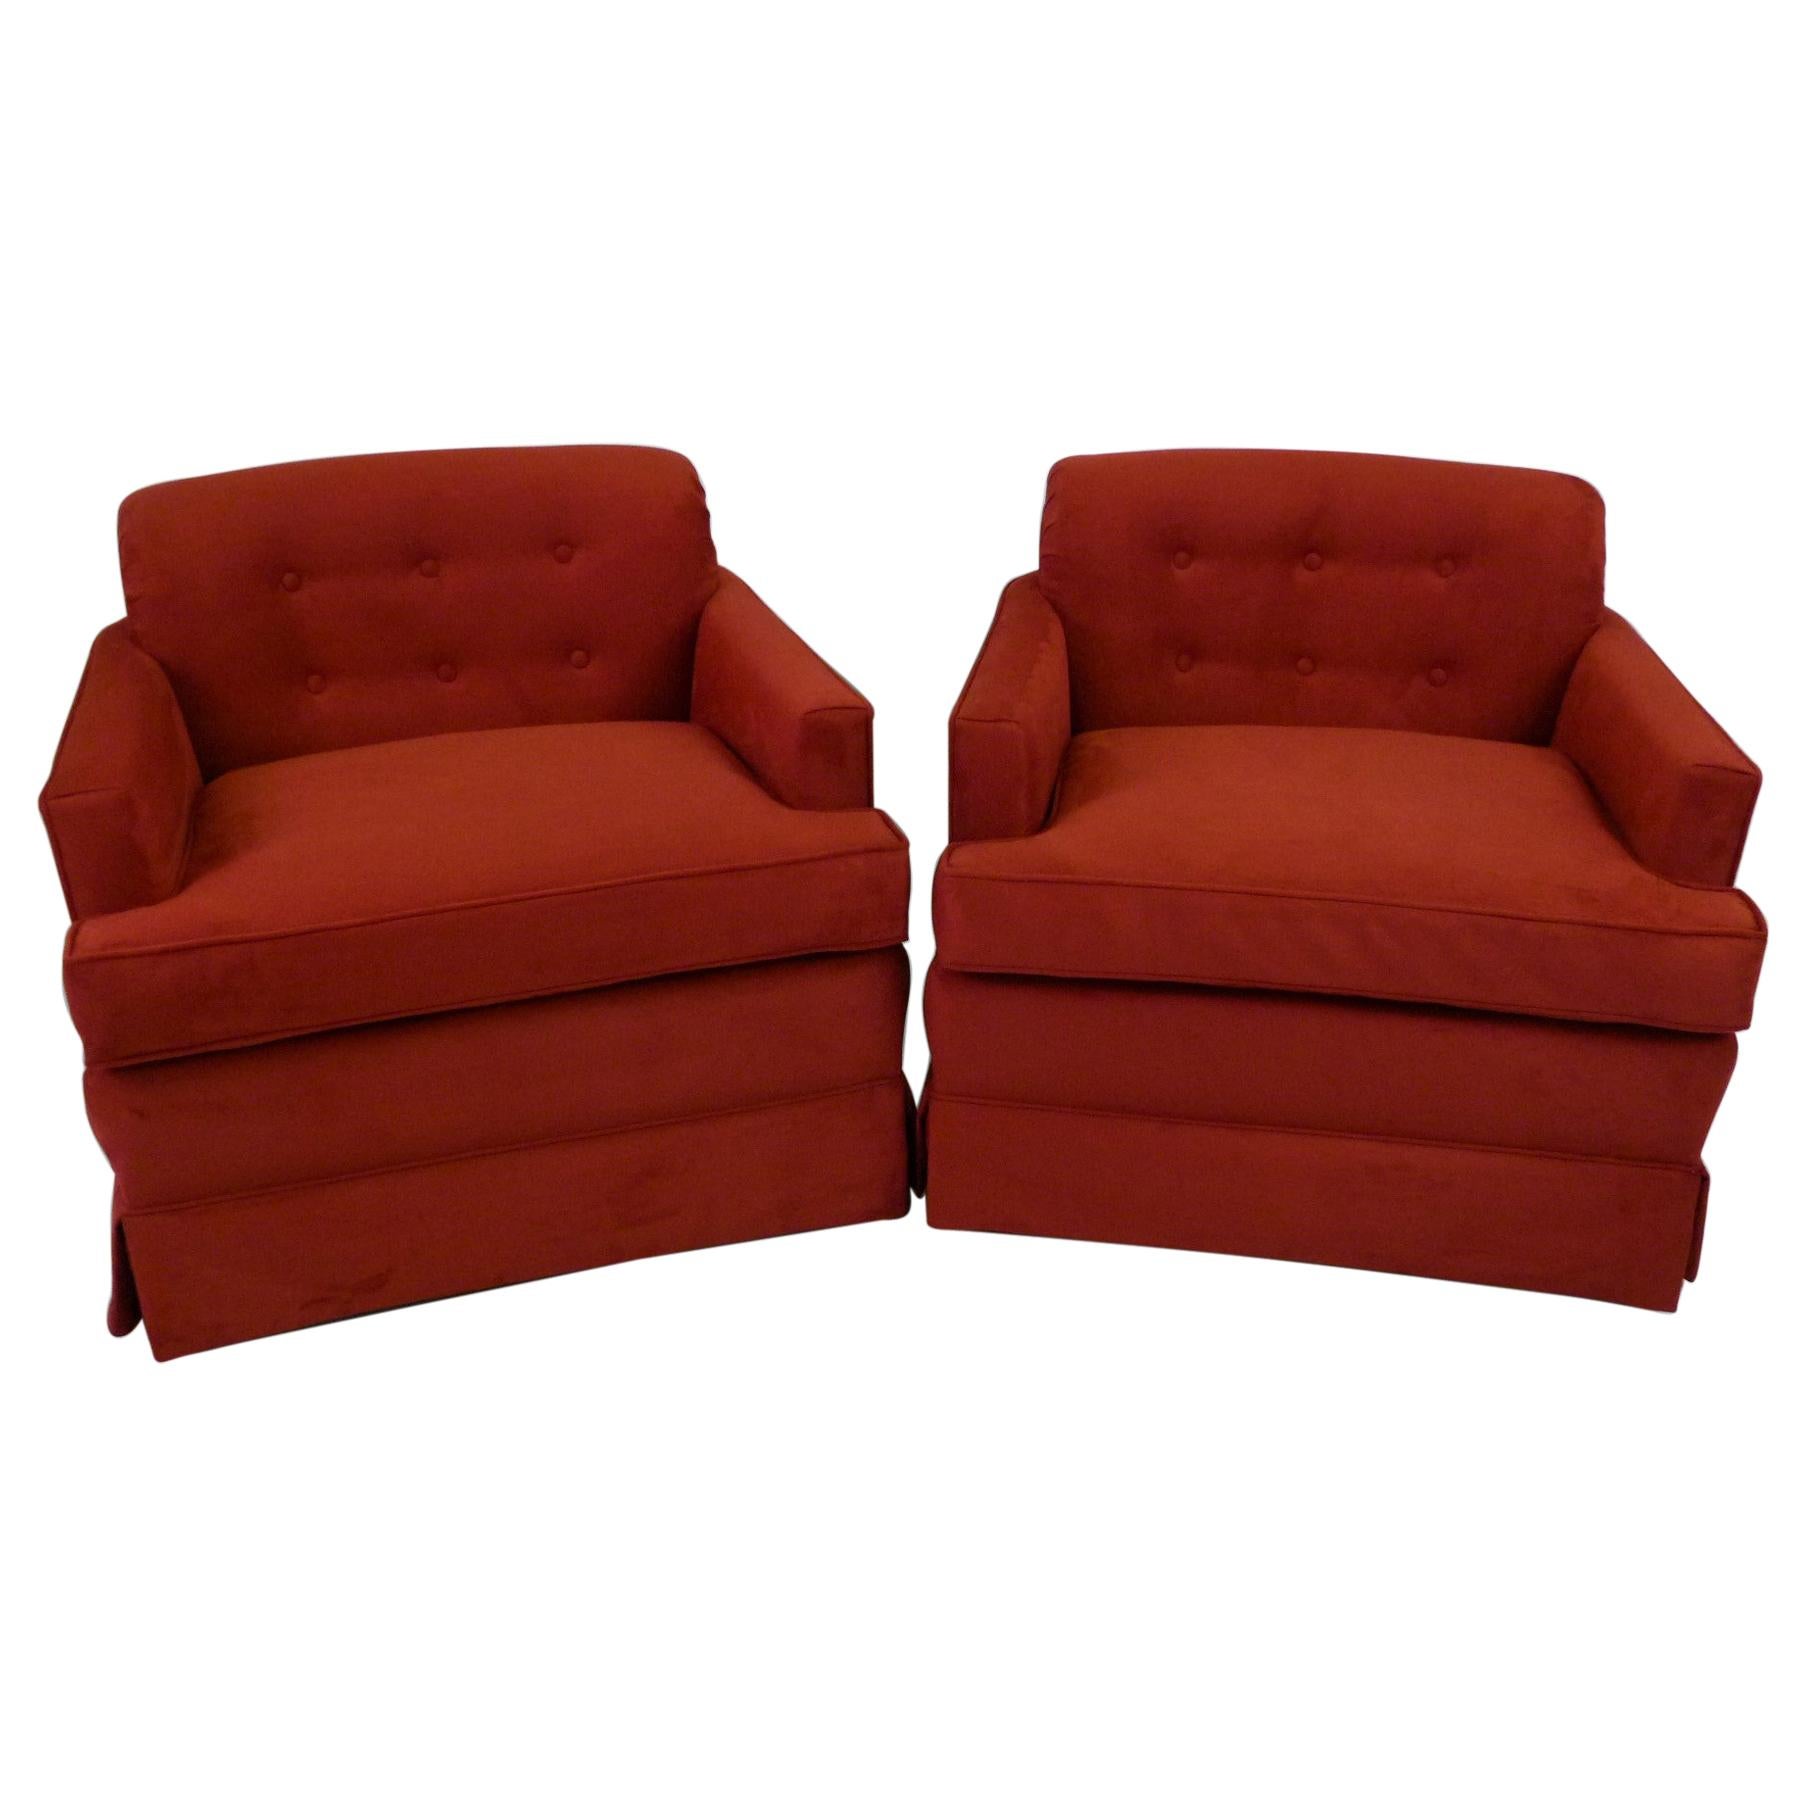 Pair of 1940s Hollywood Glamour Club Chairs in Red Ultrasuede